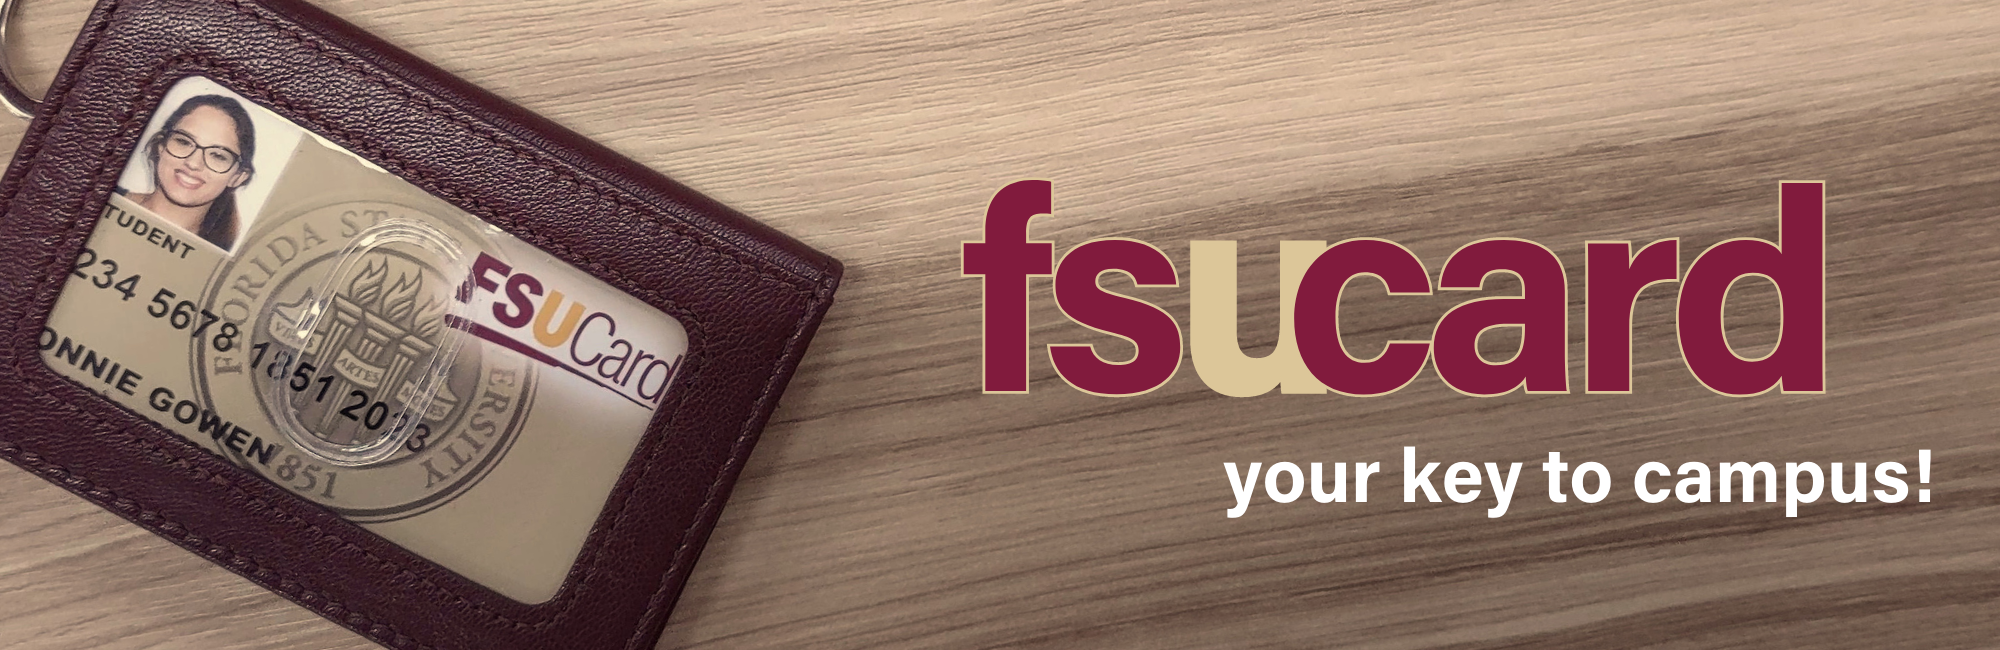 FSUCard - Your key to campus!